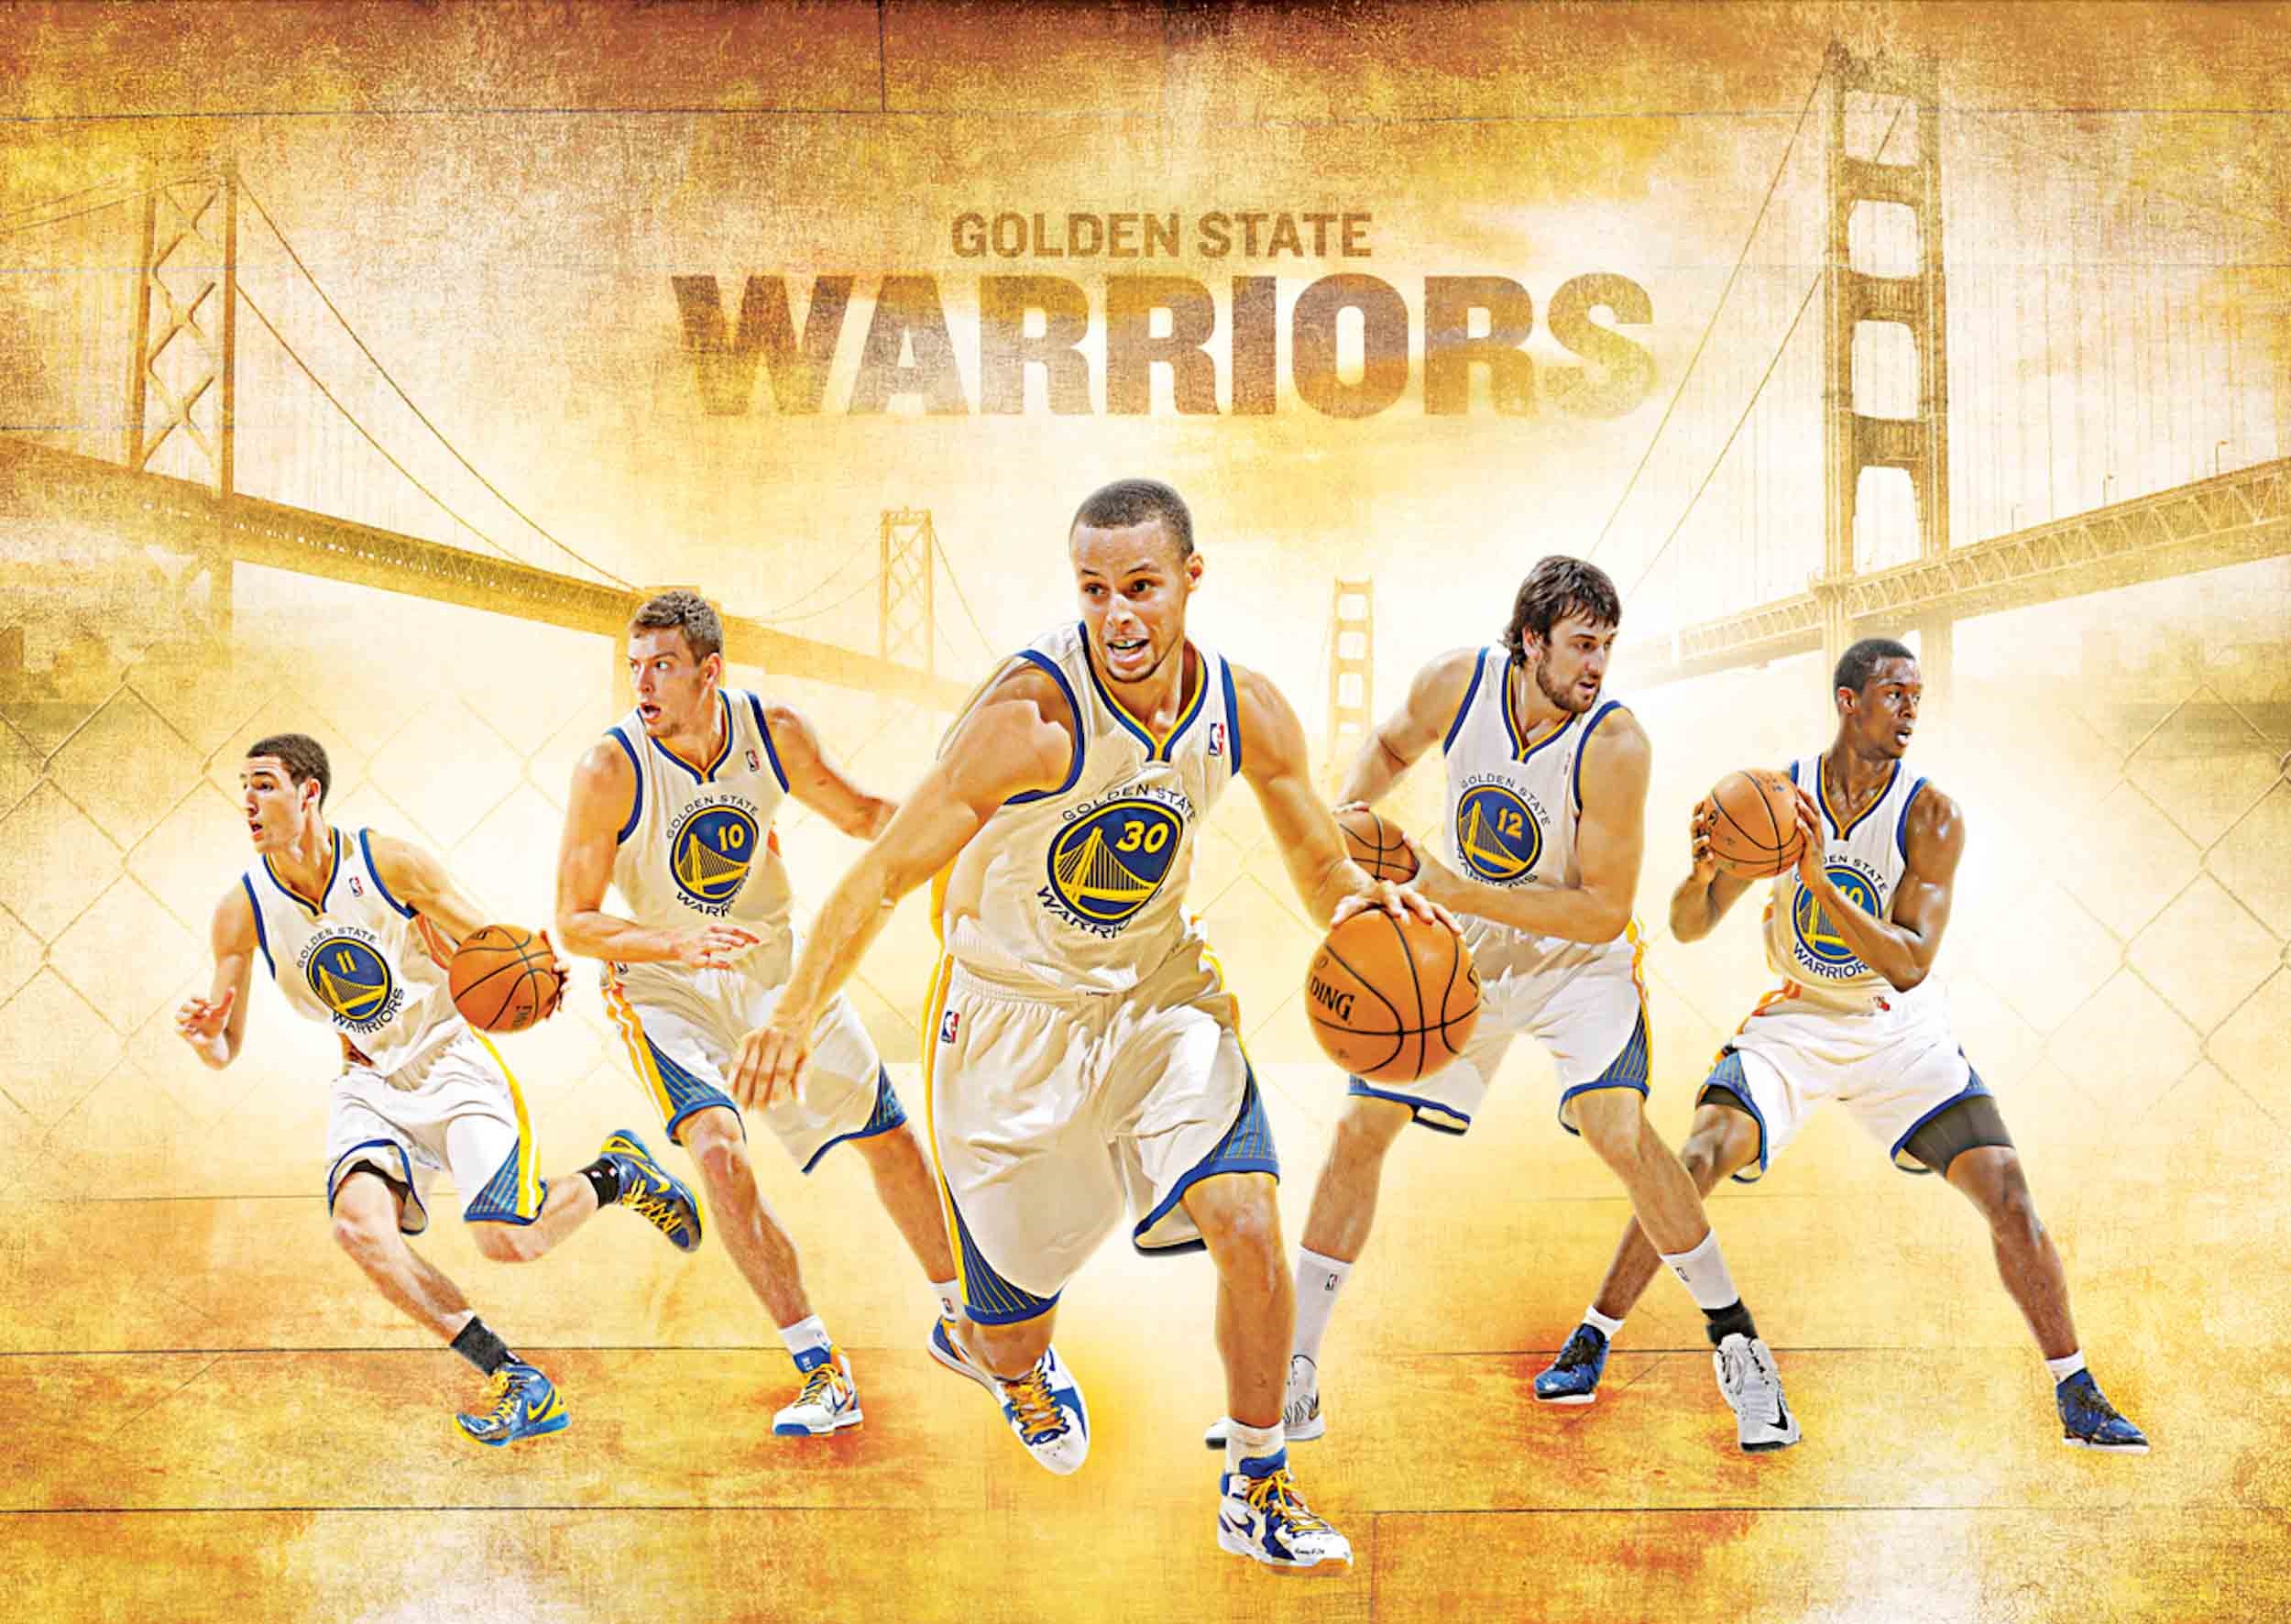 NBA 2020 Draft for the Golden State Warriors: Stephen Curry, Klay Thompson, D'Angelo ...